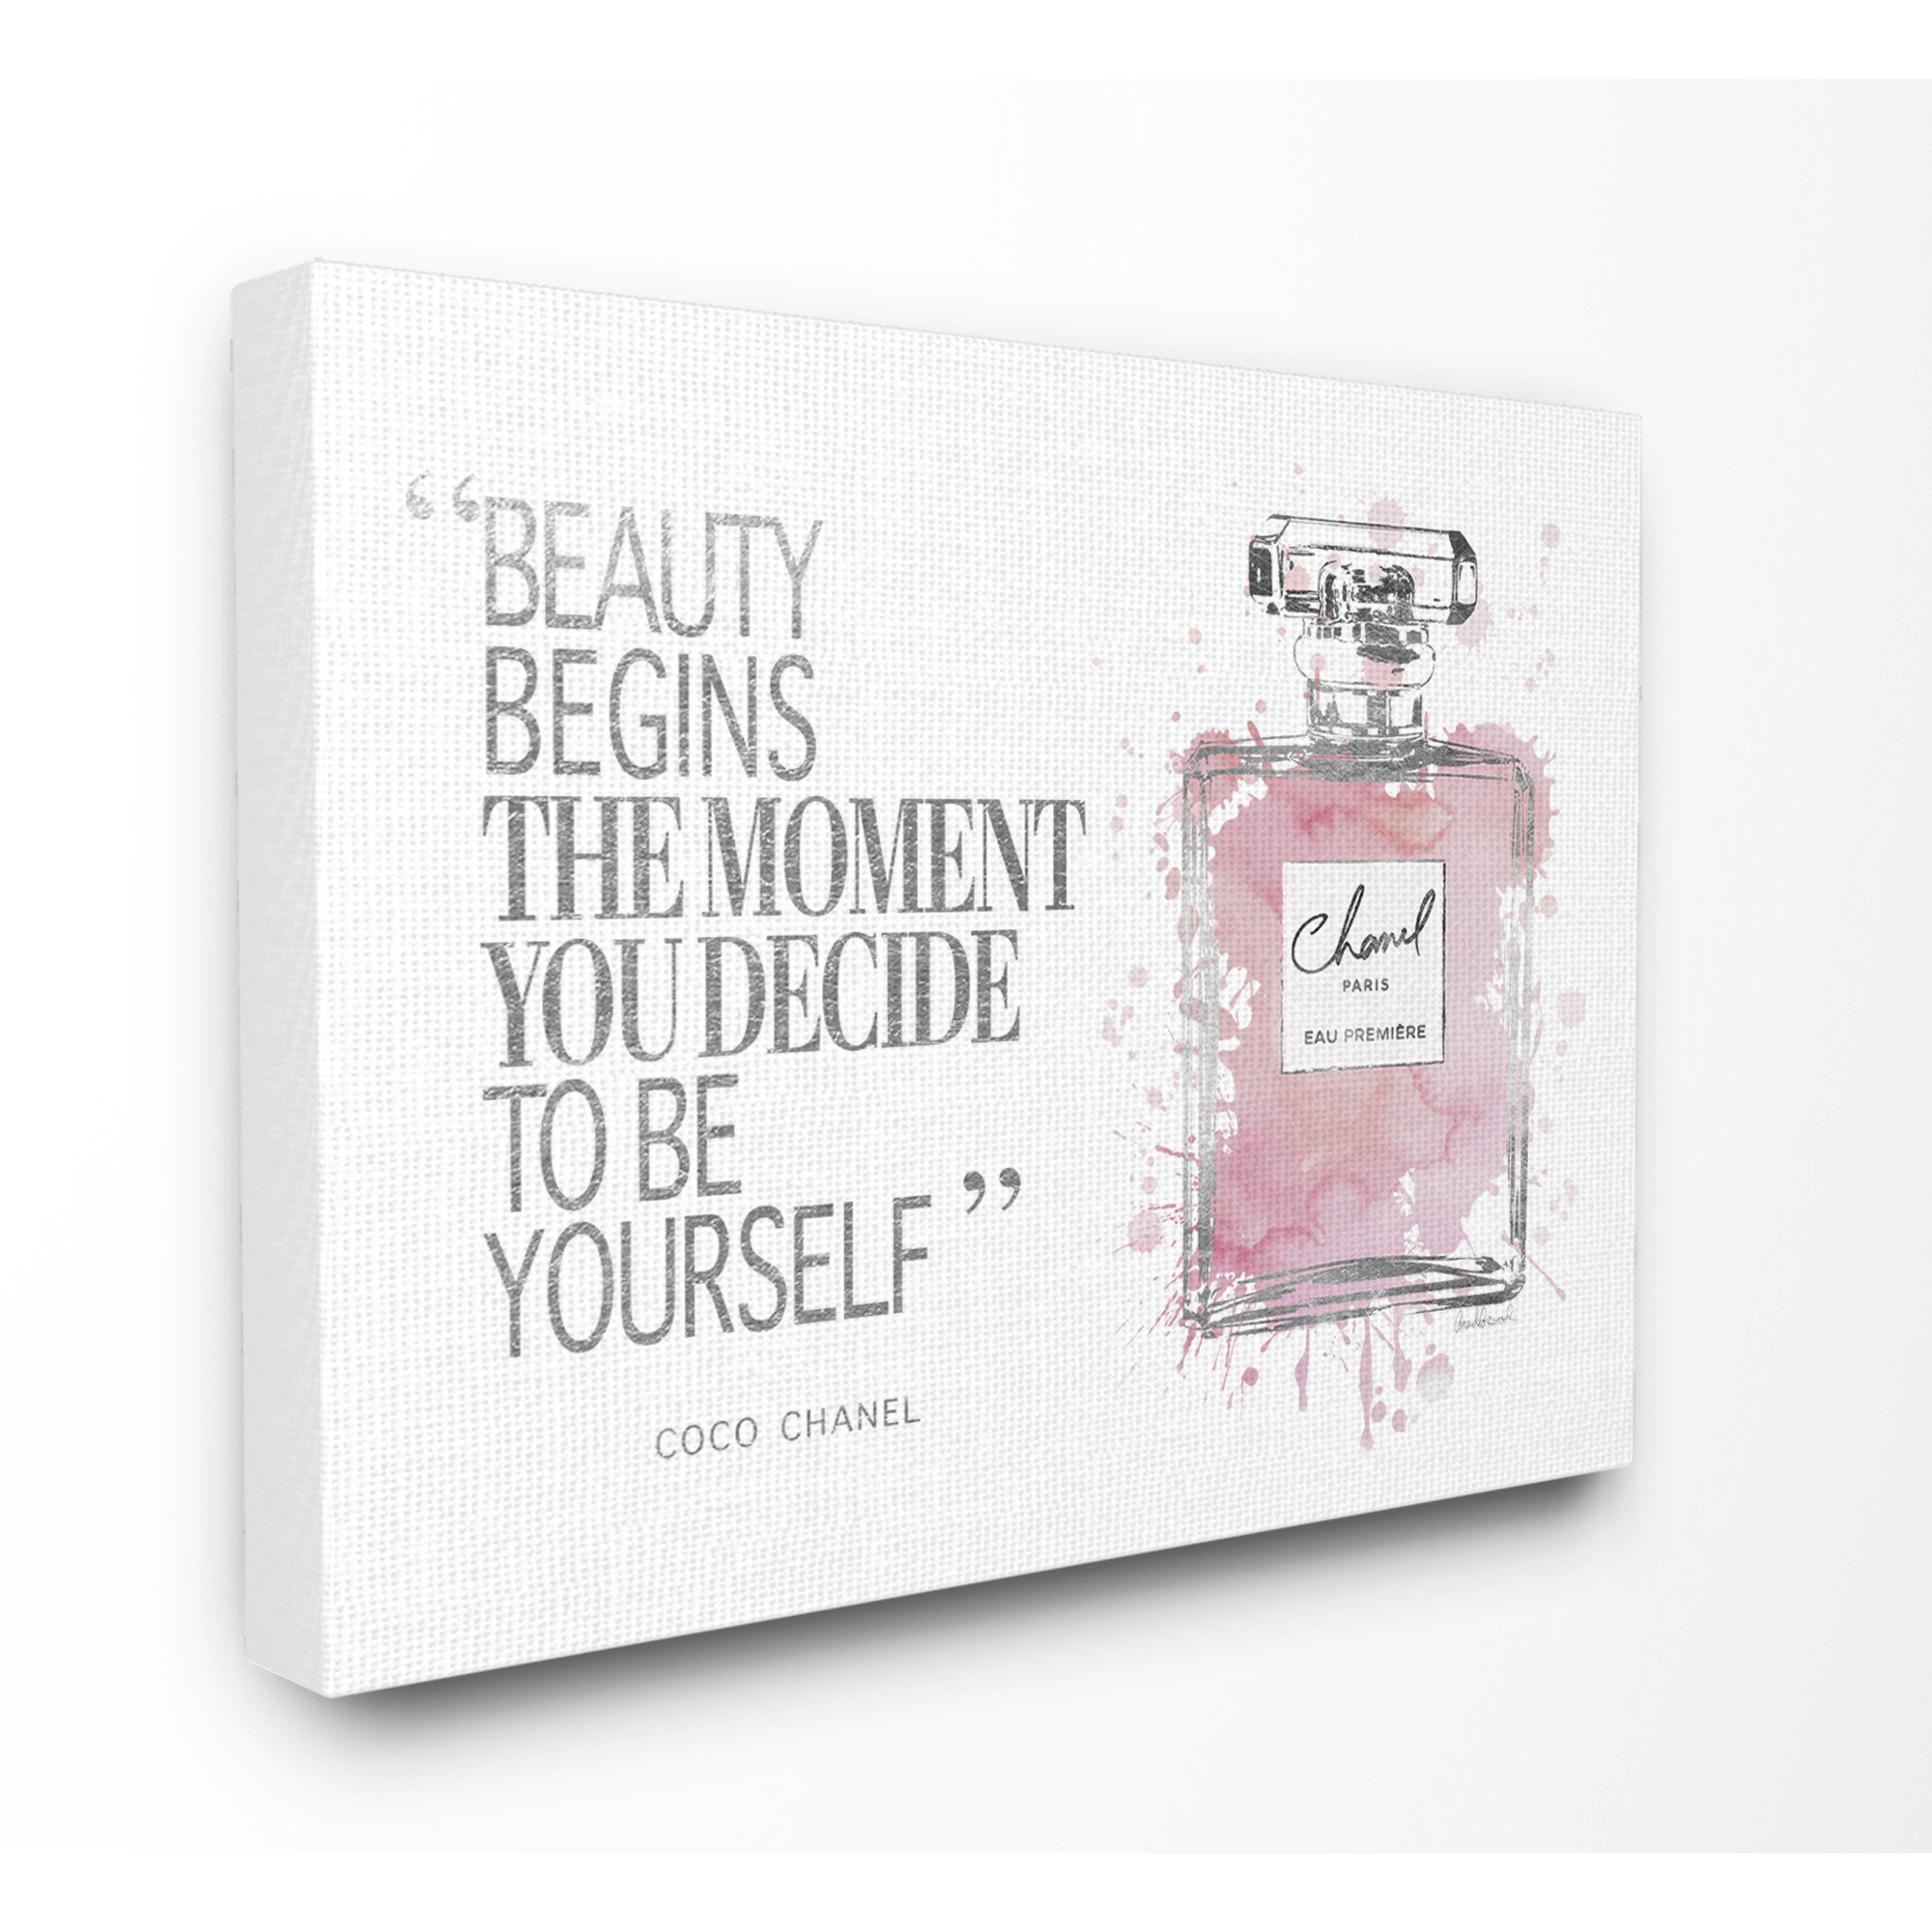 Beauty Begins Coco Chanel Inspired Print // Coco Chanel Print 